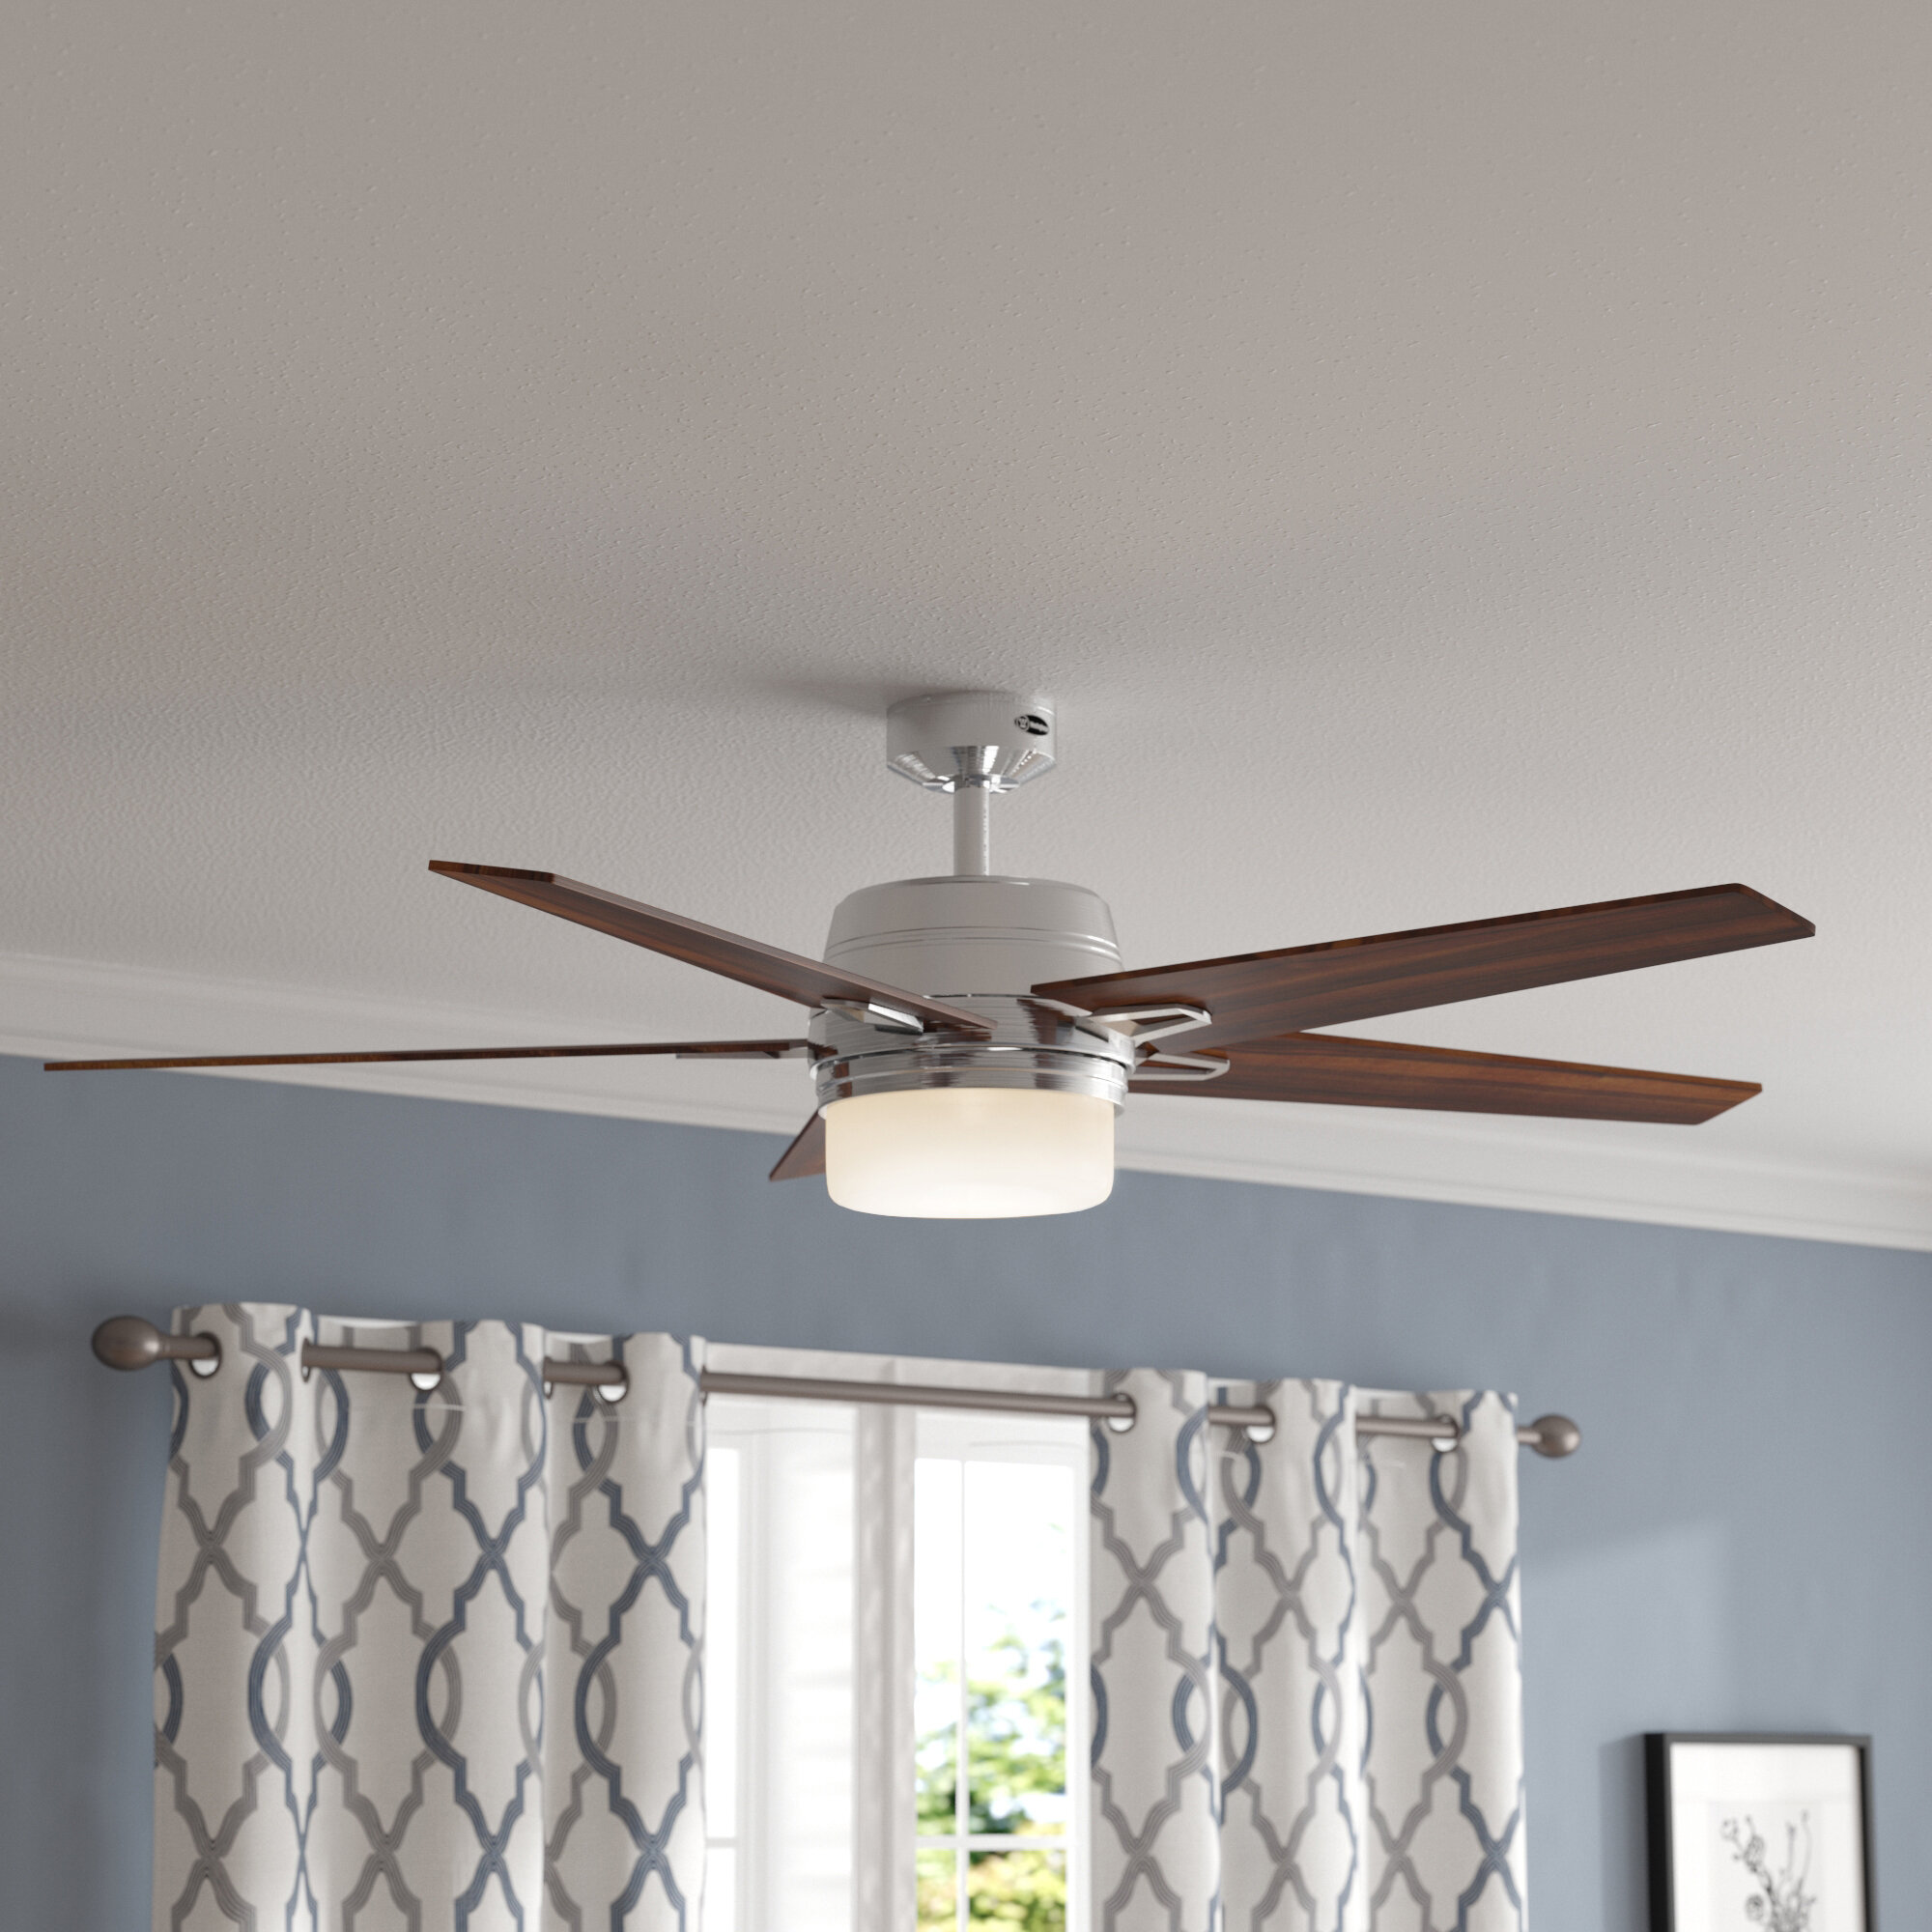 56 Ewan 5 Blade Ceiling Fan With Remote Light Kit Included